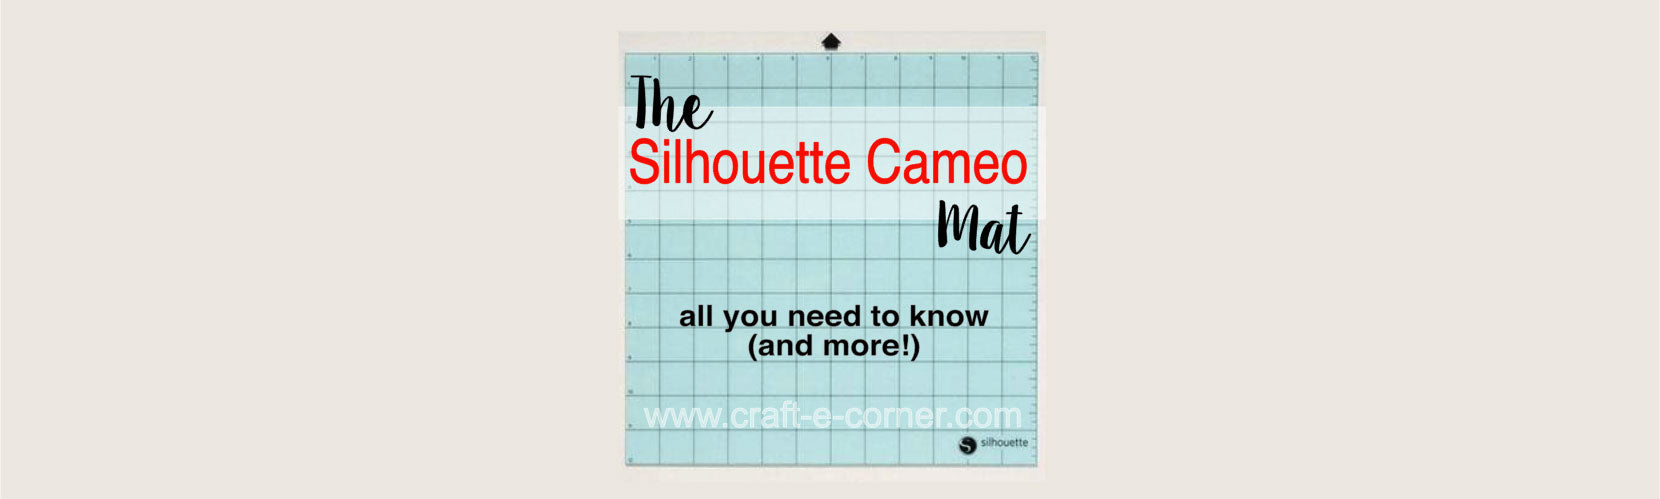 The Silhouette Cameo Mat: All You Need to Know (and more)